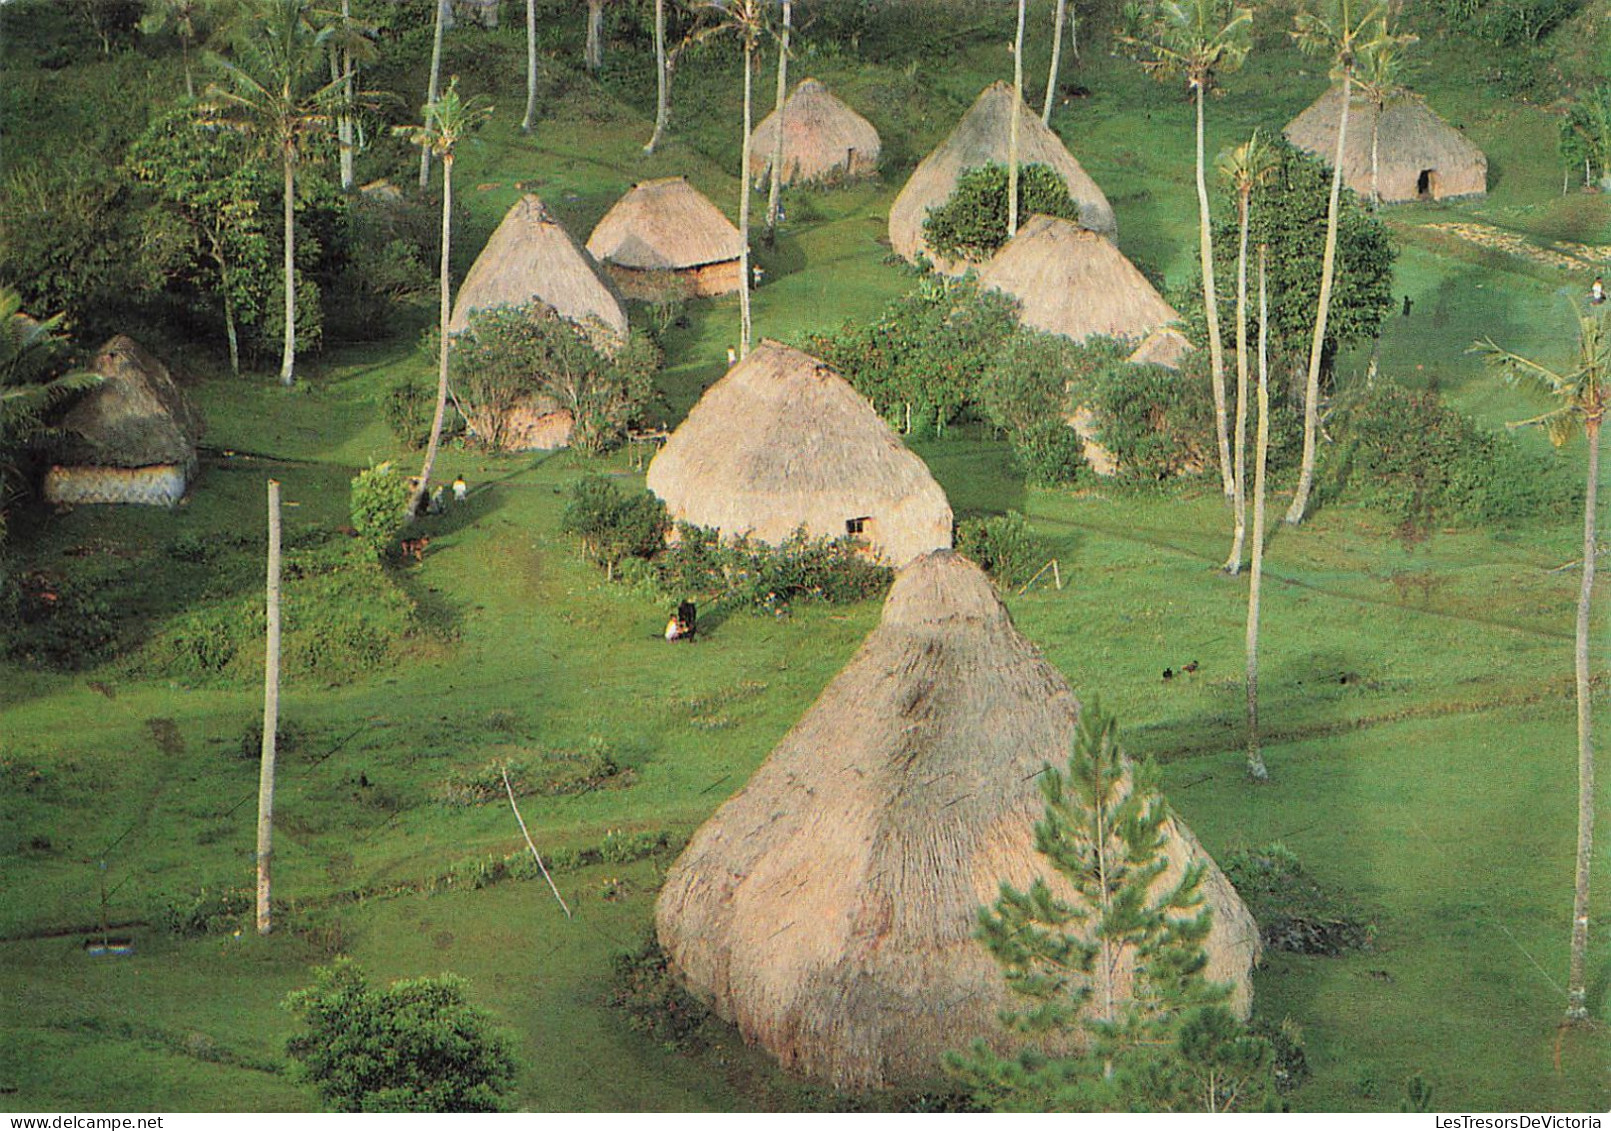 FIDJI - The Thatched Houses Called Bures Are Cool In The Summer And Warm In The Winter - Animé - Carte Postale - Figi